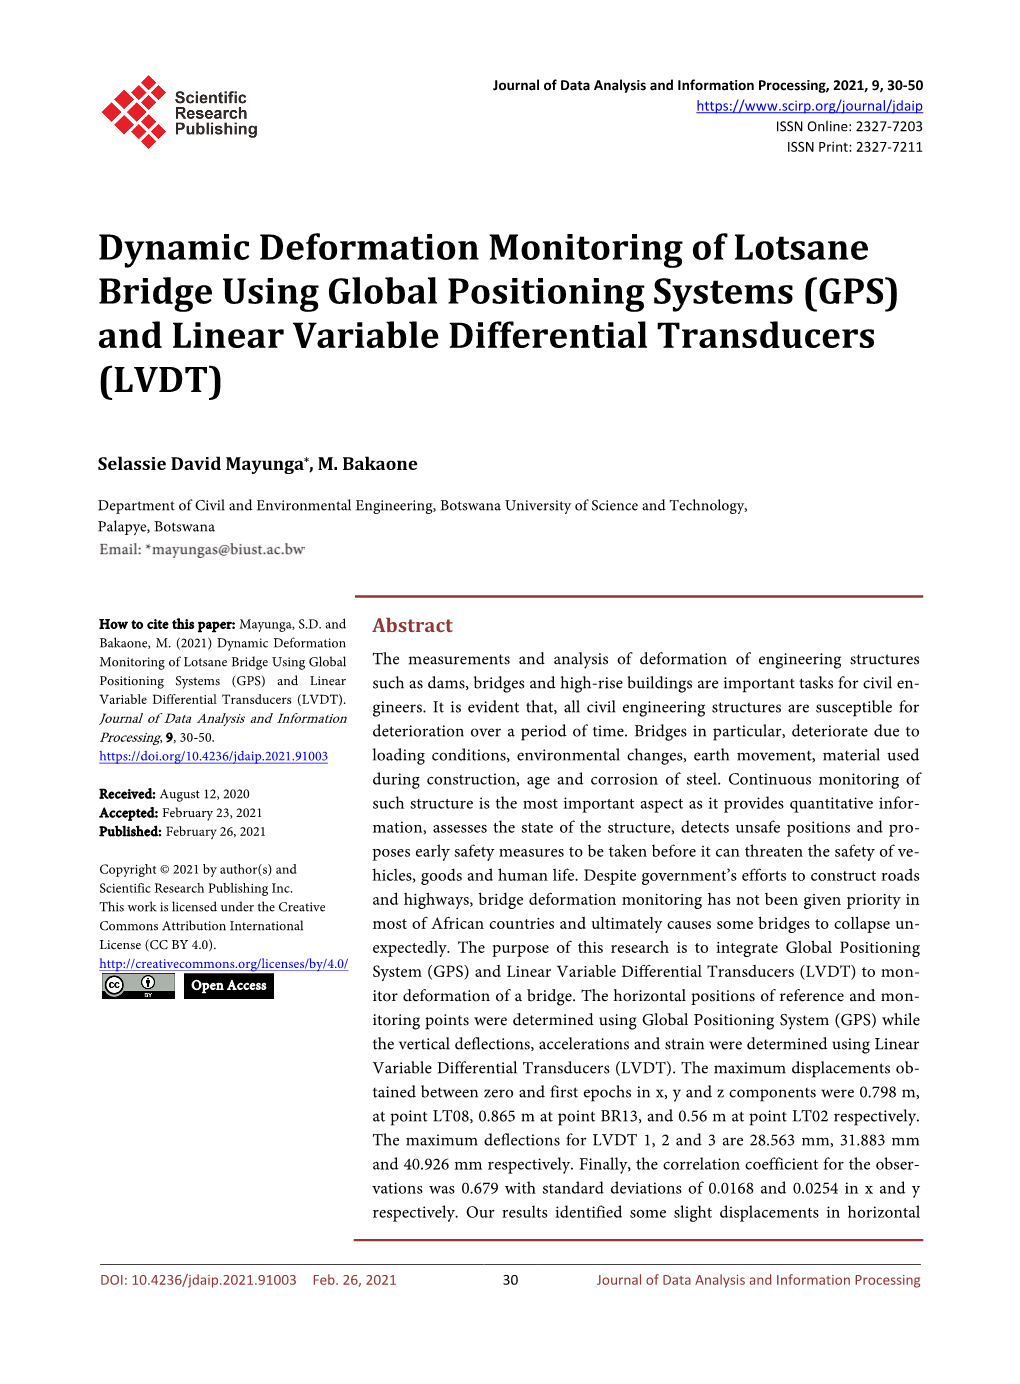 Dynamic Deformation Monitoring of Lotsane Bridge Using Global Positioning Systems (GPS) and Linear Variable Differential Transducers (LVDT)